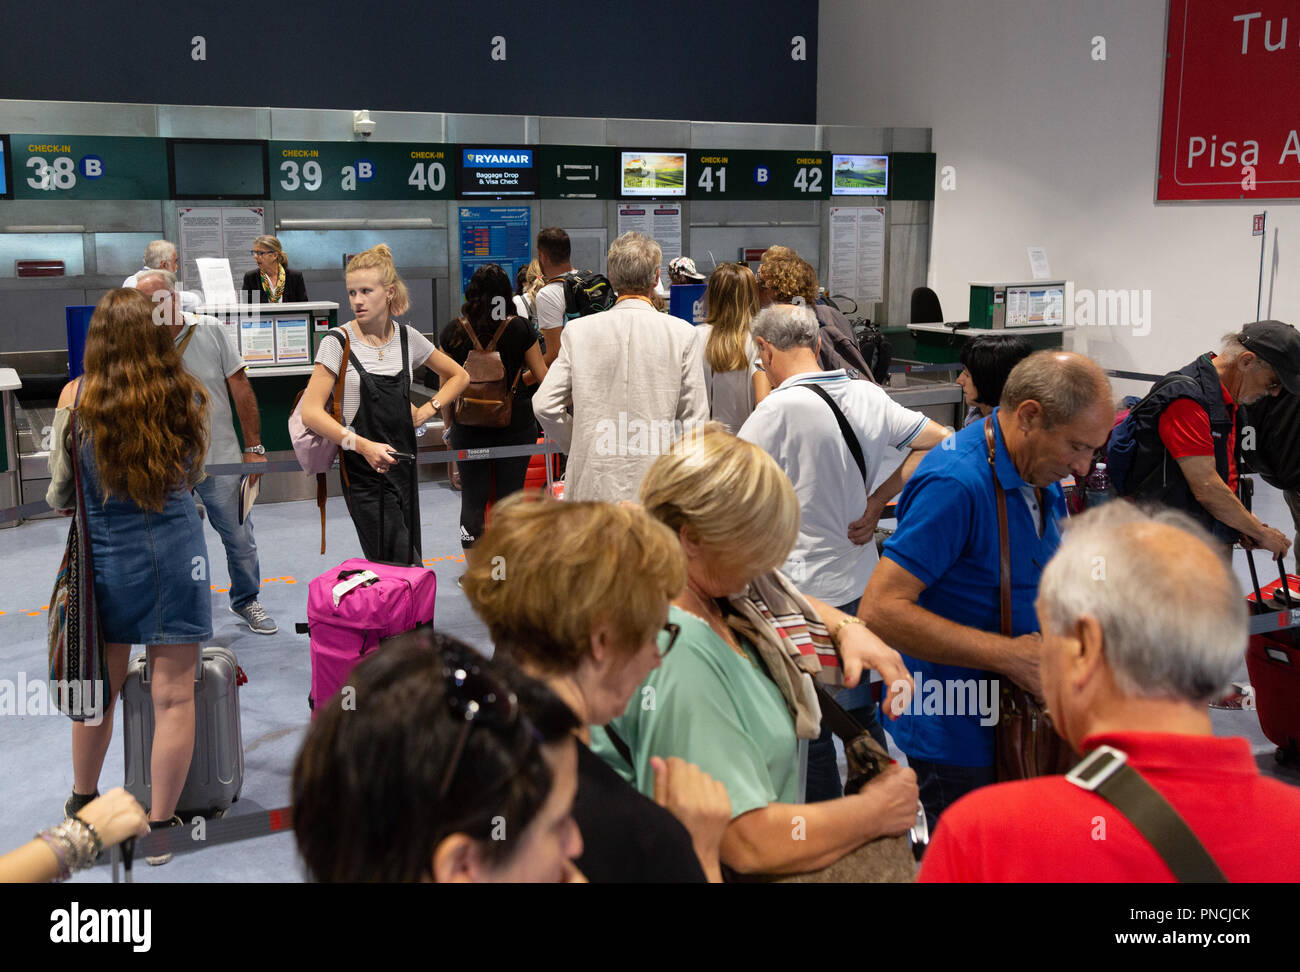 Passengers at the baggage check in, the terminal interior, Pisa International Airport, Pisa, Tuscany, Italy Europe Stock Photo